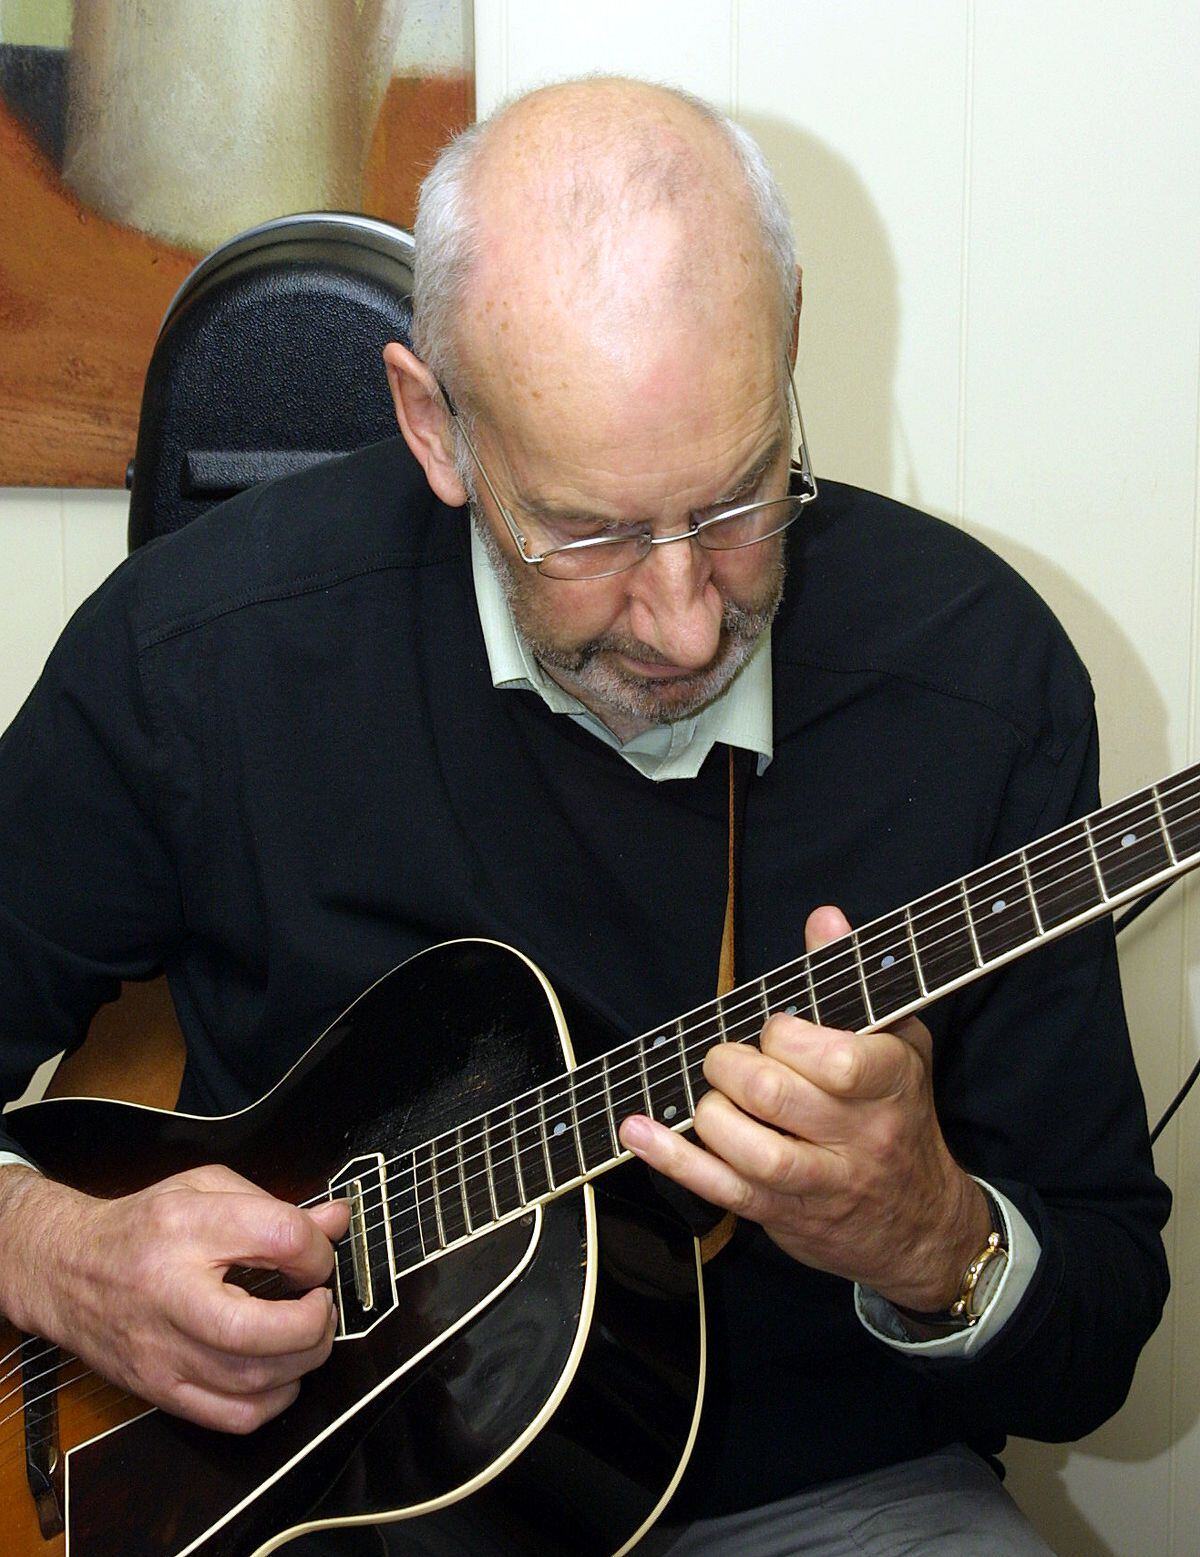 Roy performing at the Bridgnorth Jazz Festival in 2005